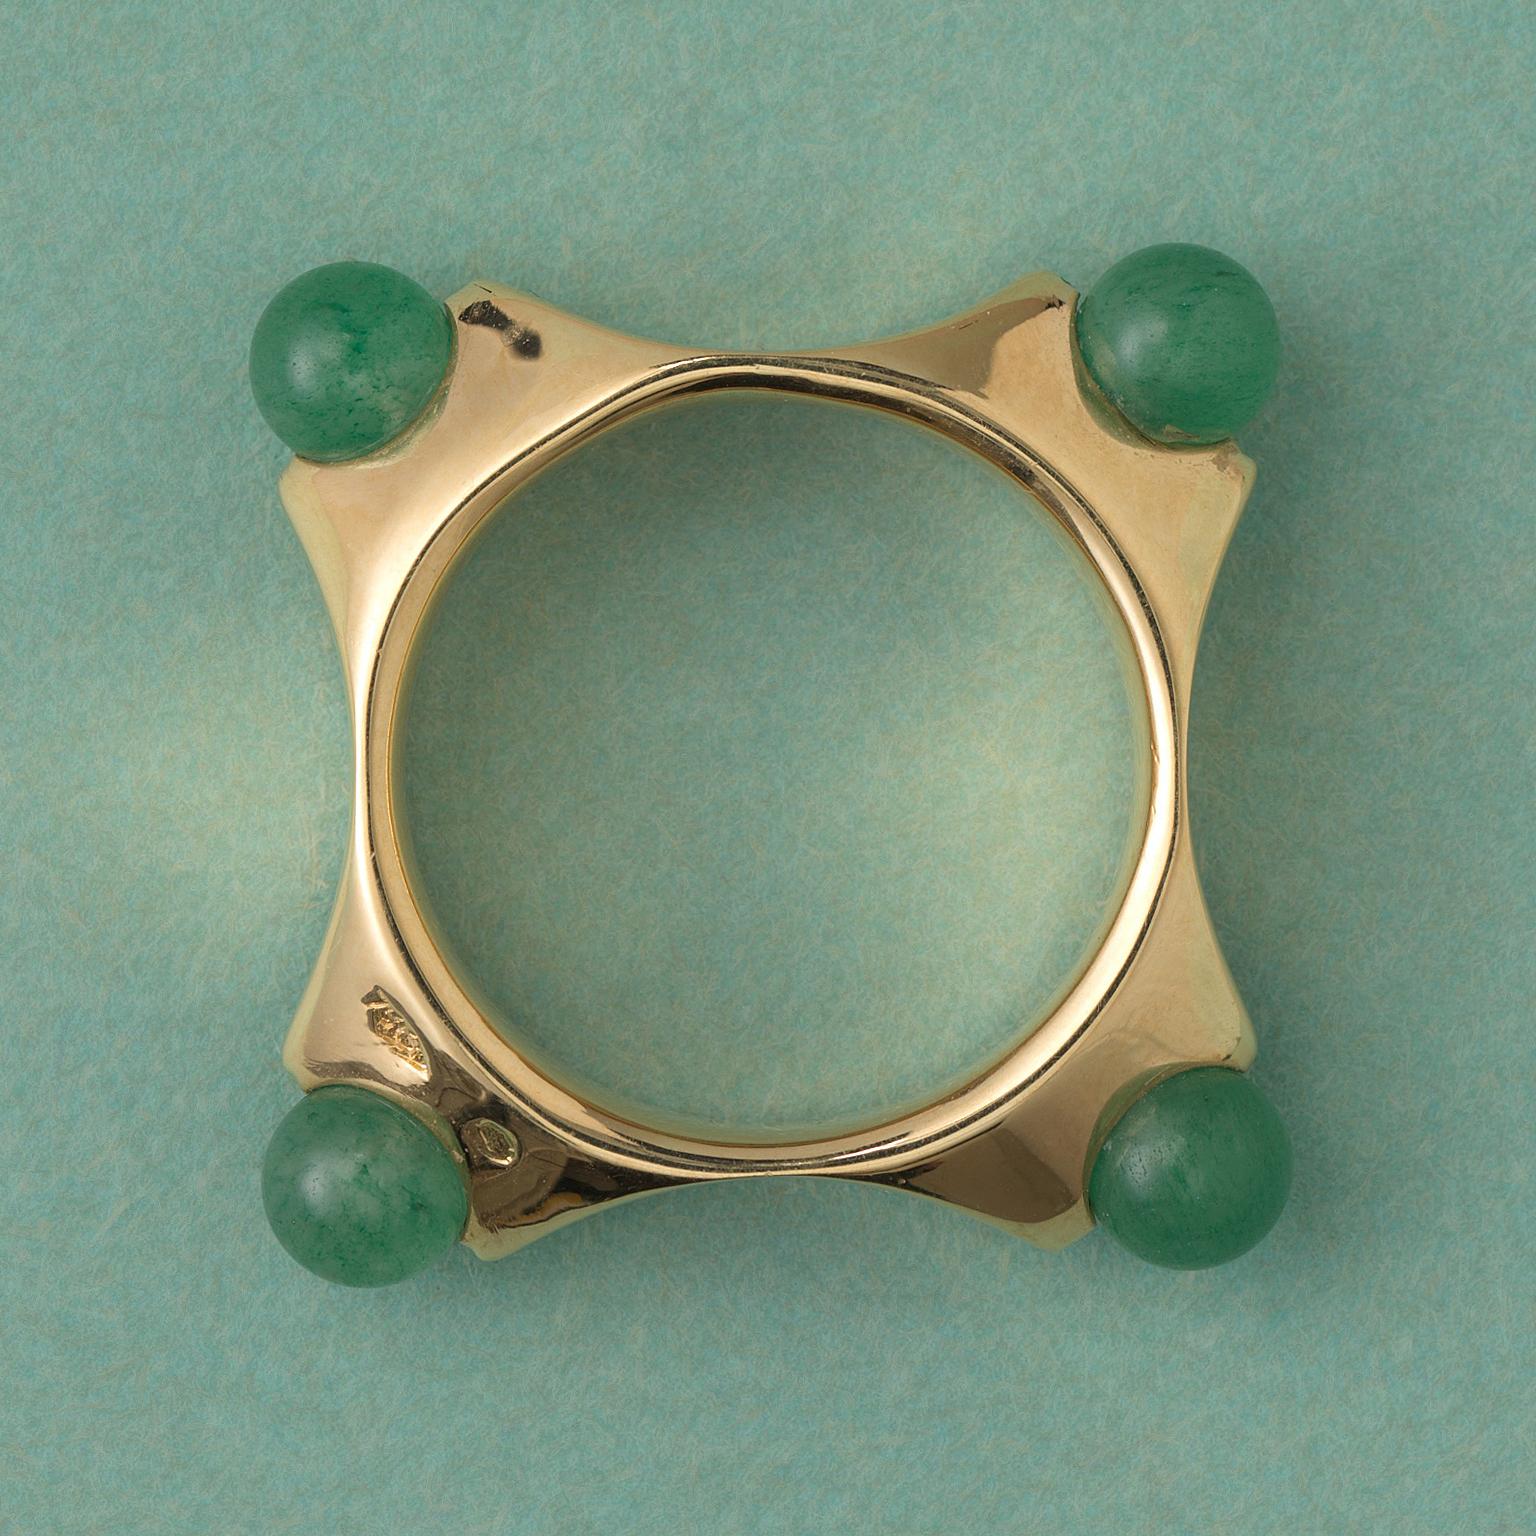 A cool 18 carat gold square shaped ring each corner set with a aventurine ball, France.

size: 8.75 mm. 8 ¾ US.
weight: 6.85 grams.
width: circa 7 mm.
size aventurine balls: 5 mm.